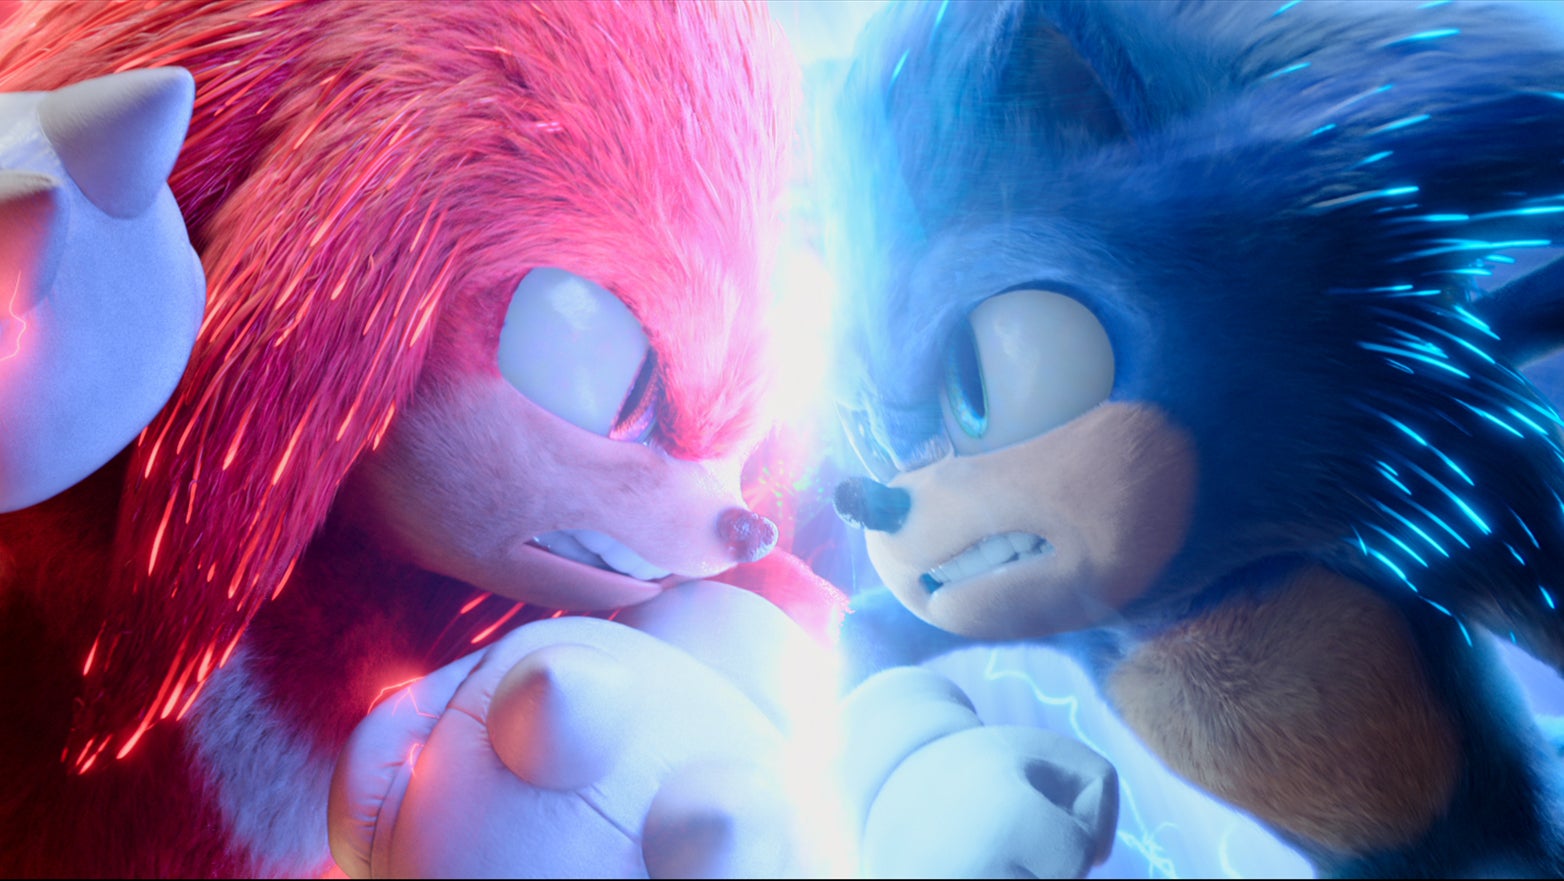 Image for Sonic the Hedgehog 2 puts the video game back into the film series